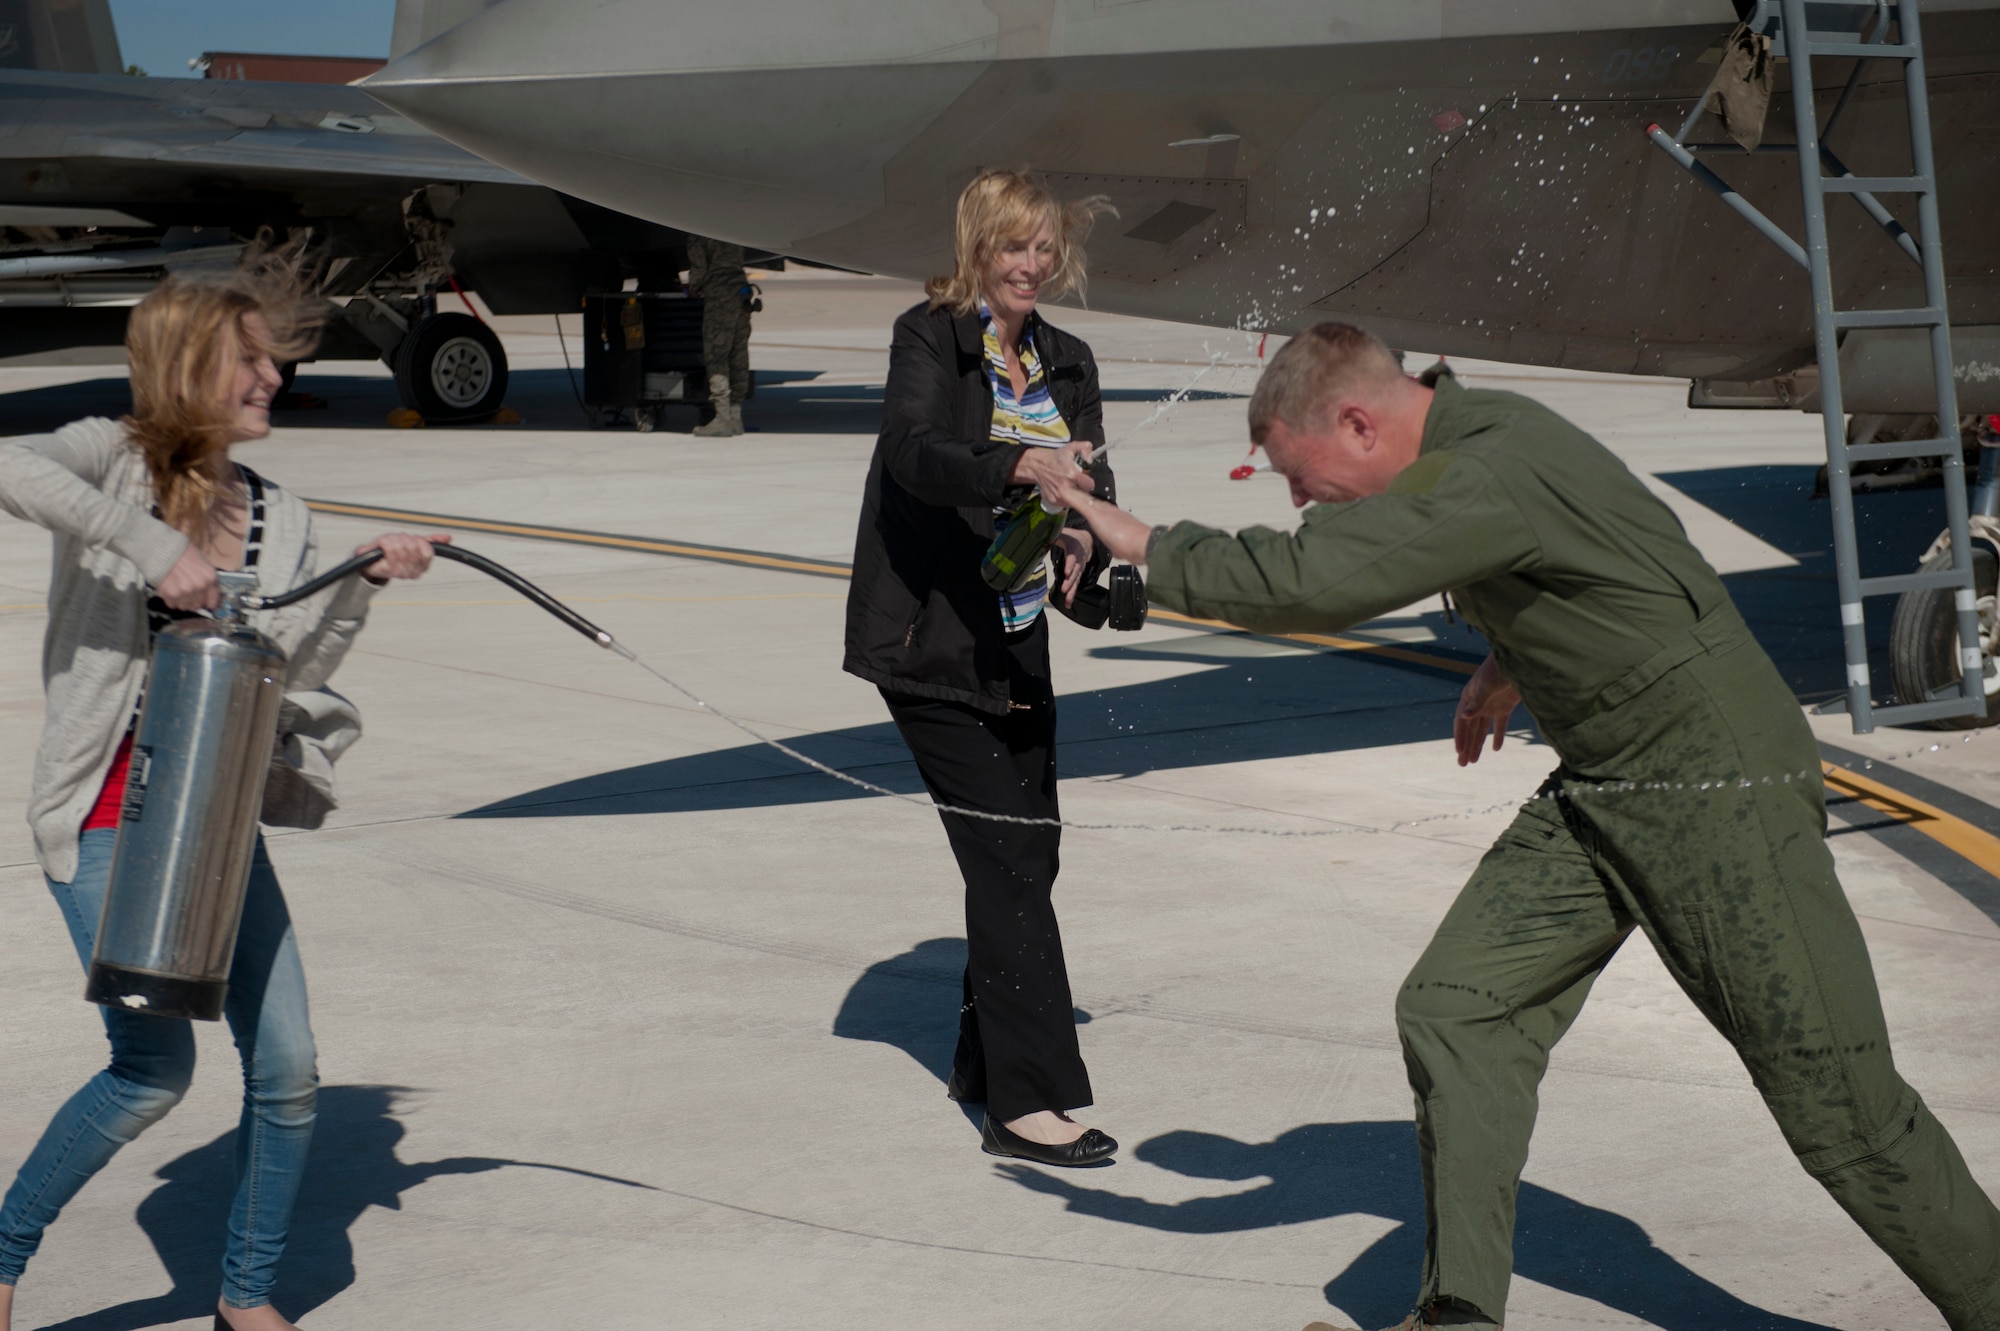 Nicole Croft and Vicki Croft spray Col. Andrew Croft, 49th Wing commander, after landing from the final F-22 Raptor four-ship tactical sortie flown at Holloman Air Force Base, N.M., Feb. 20. The 7th Fighter Squadron and members of the Holloman community celebrated this sortie before the F-22s depart for Tyndall Air Force Base, Fla., in early April. (U.S. Air Force photo by Airman 1st Class Aaron Montoya / Released)